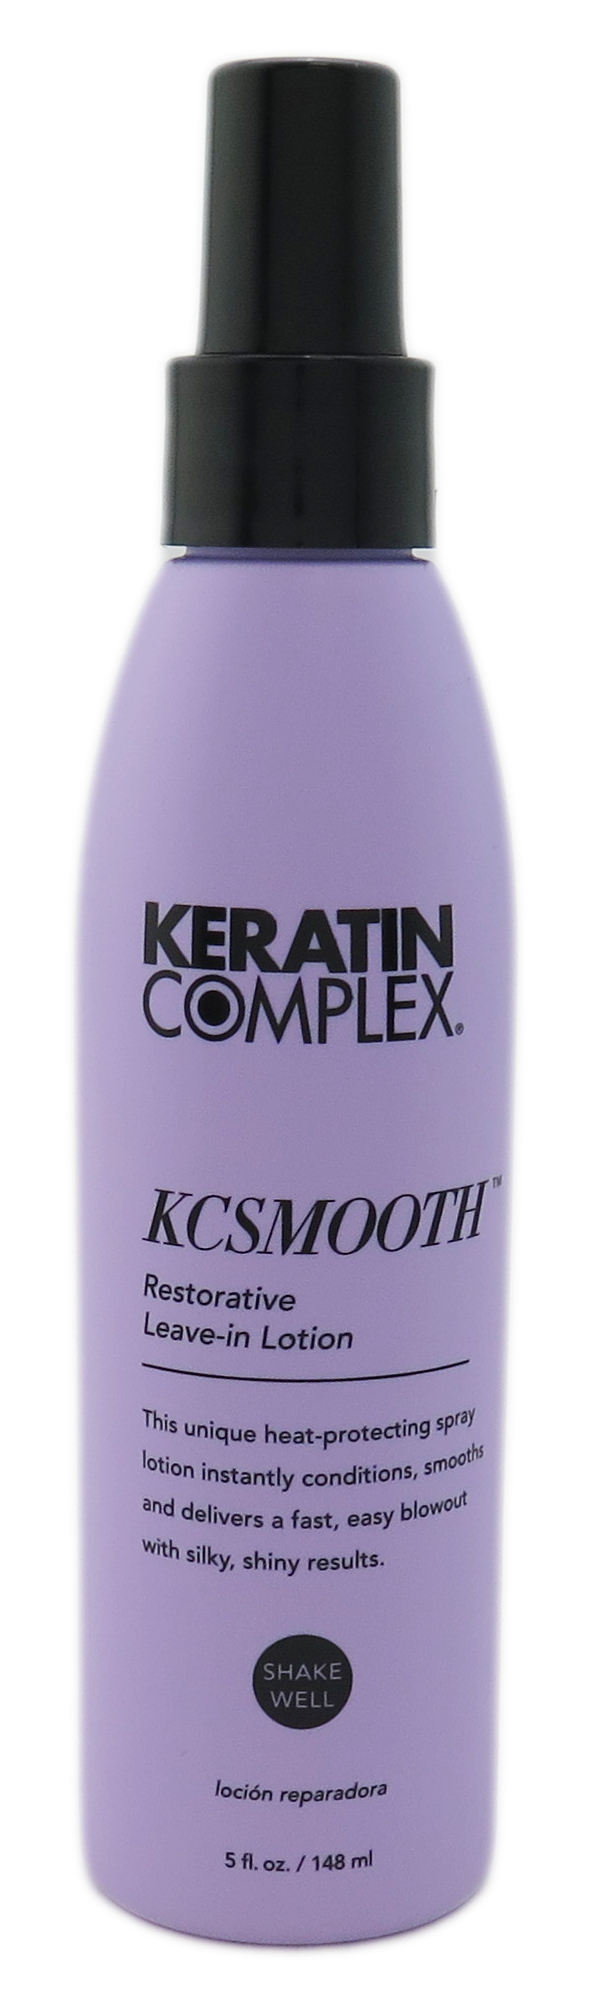 Keratin Complex KCSMOOTH Restorative Leave in Lotion 5oz